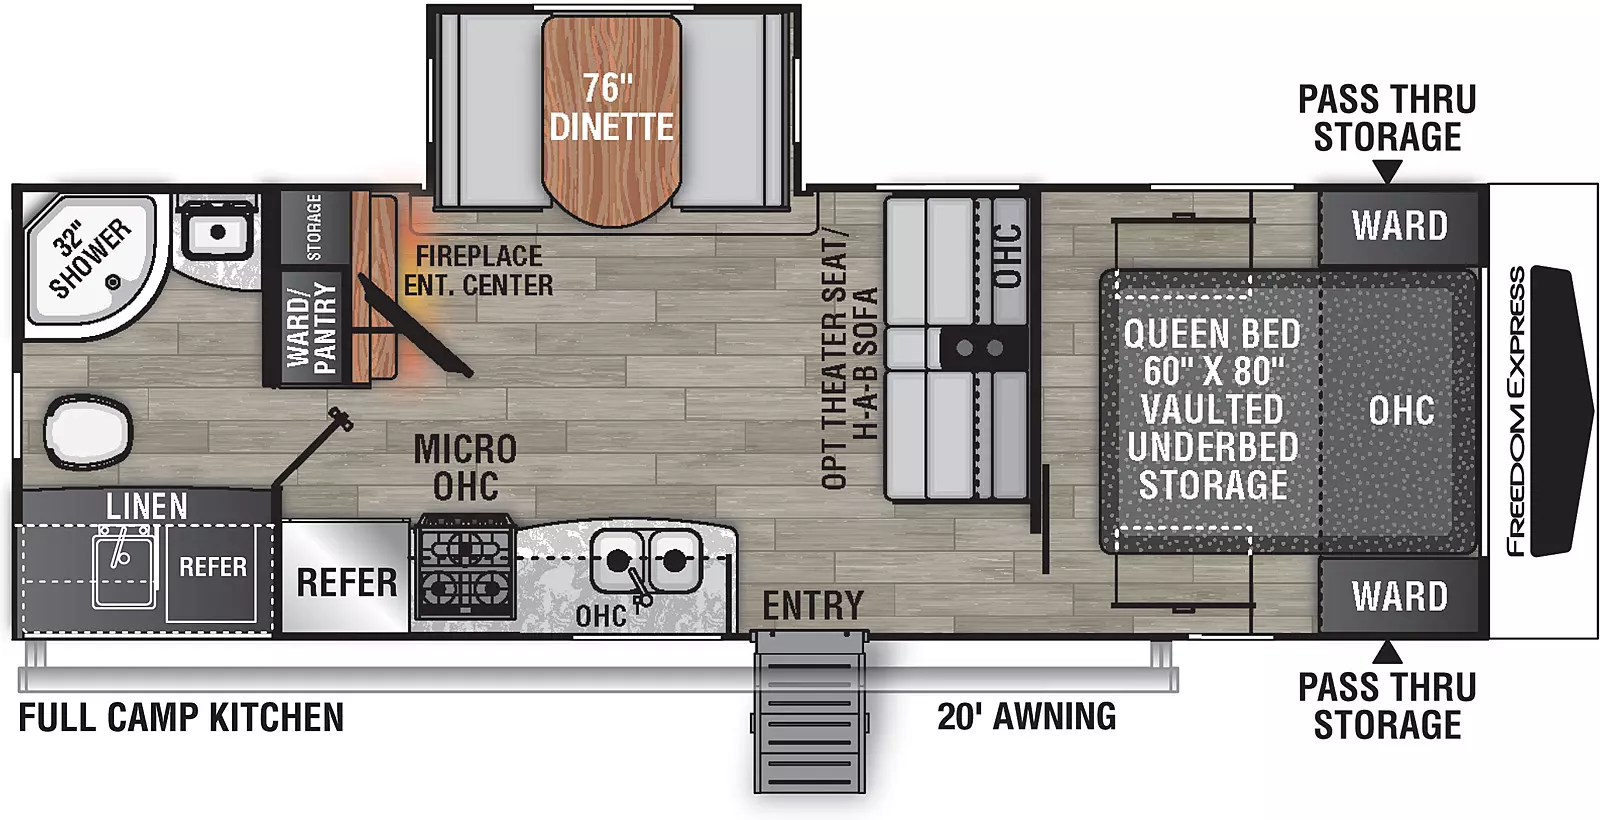 The 252RBS has one slide out on the off-door side and one entry door on the door side. Interior layout from front to back: front bedroom containing foot facing  queen bed with vaulted under-bed storage, overhead cabinet, and wardrobes on either side of bed; sofa with overhead cabinet; kitchen living dining area off-door side slide out containing booth dinette; door side kitchen containing double basin sink, overhead cabinet, cook top stove, microwave, and refrigerator; off- door side pantry; off-door side entertainment center with fireplace; off-door side bathroom; and door side linen storage. Exterior camp kitchen with sink, mini refrigerator and cook top. 